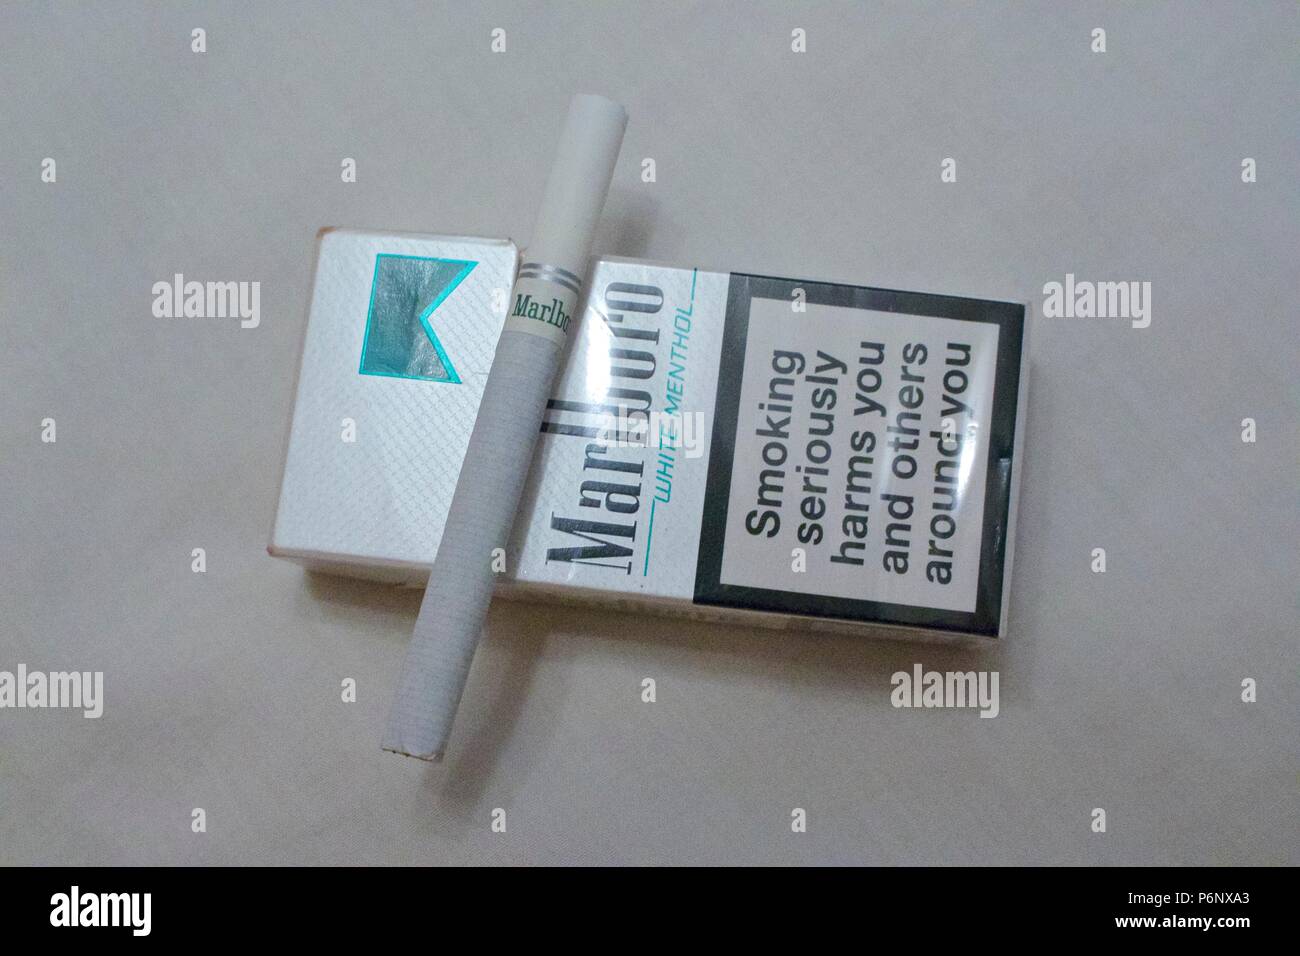 No longer on sale Marlboro White Menthol 10 pack cigarette packet with branding. Menthol cigarettes will become illegal to sell in the UK by May 2020 Stock Photo